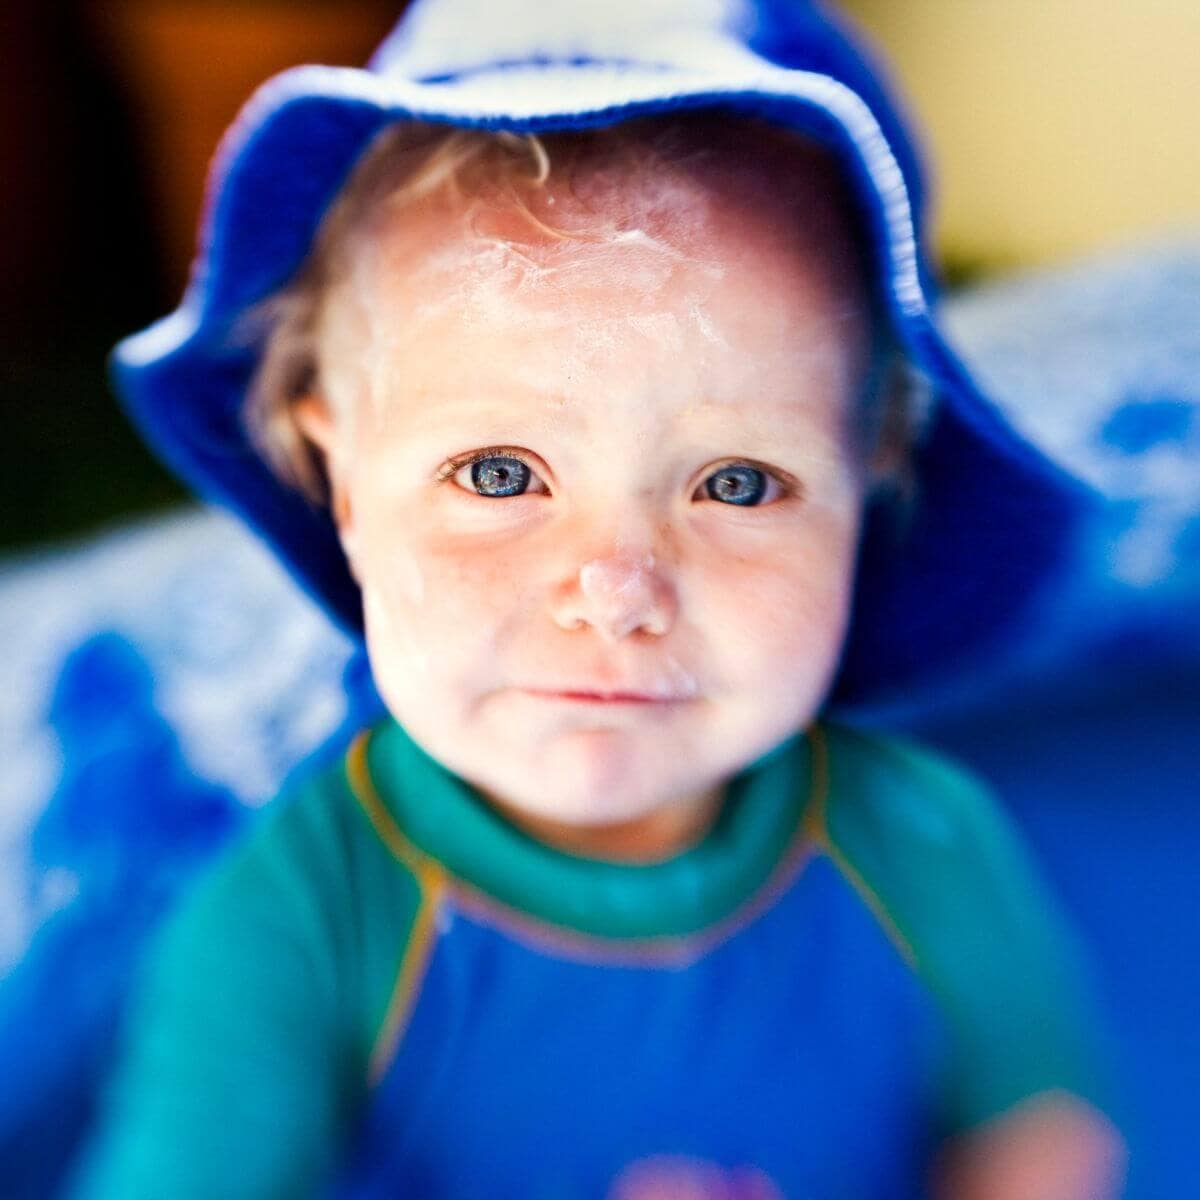 A boy is sitting down on a blue towel. He is wearing a blue and teal swim shirt and a dark blue hat.